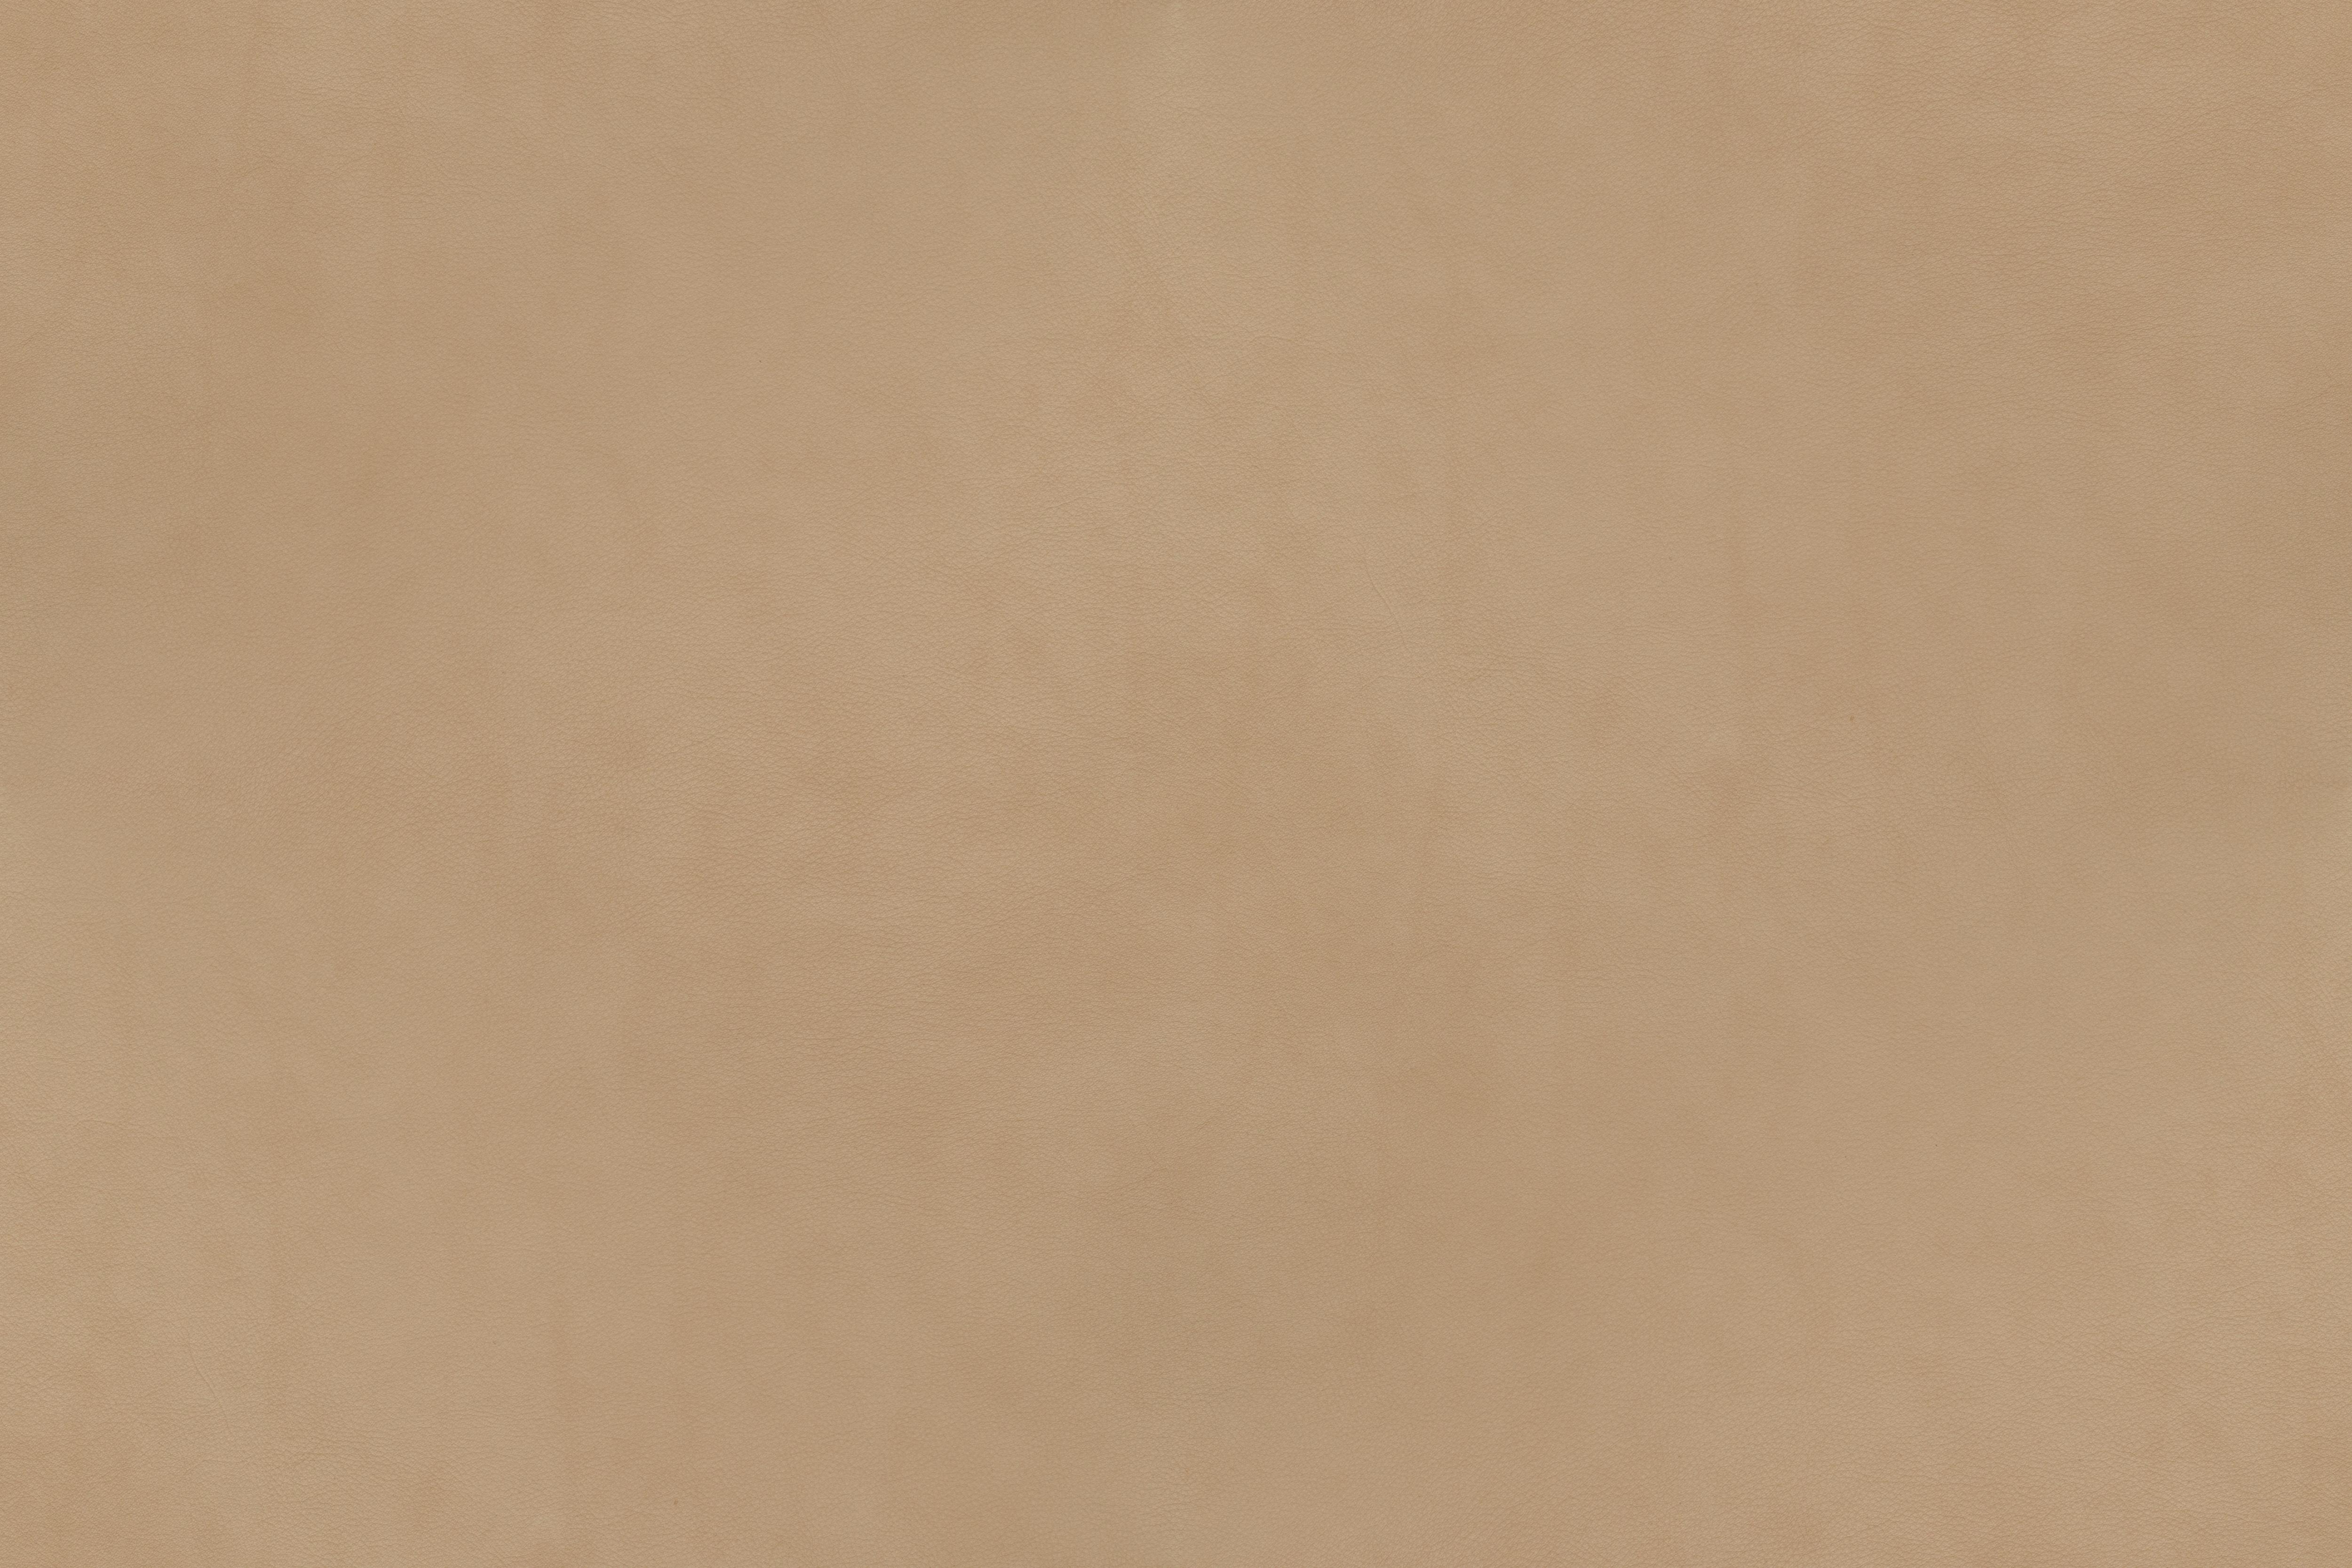 Beige Textured   Viewing  Template PPT Backgrounds